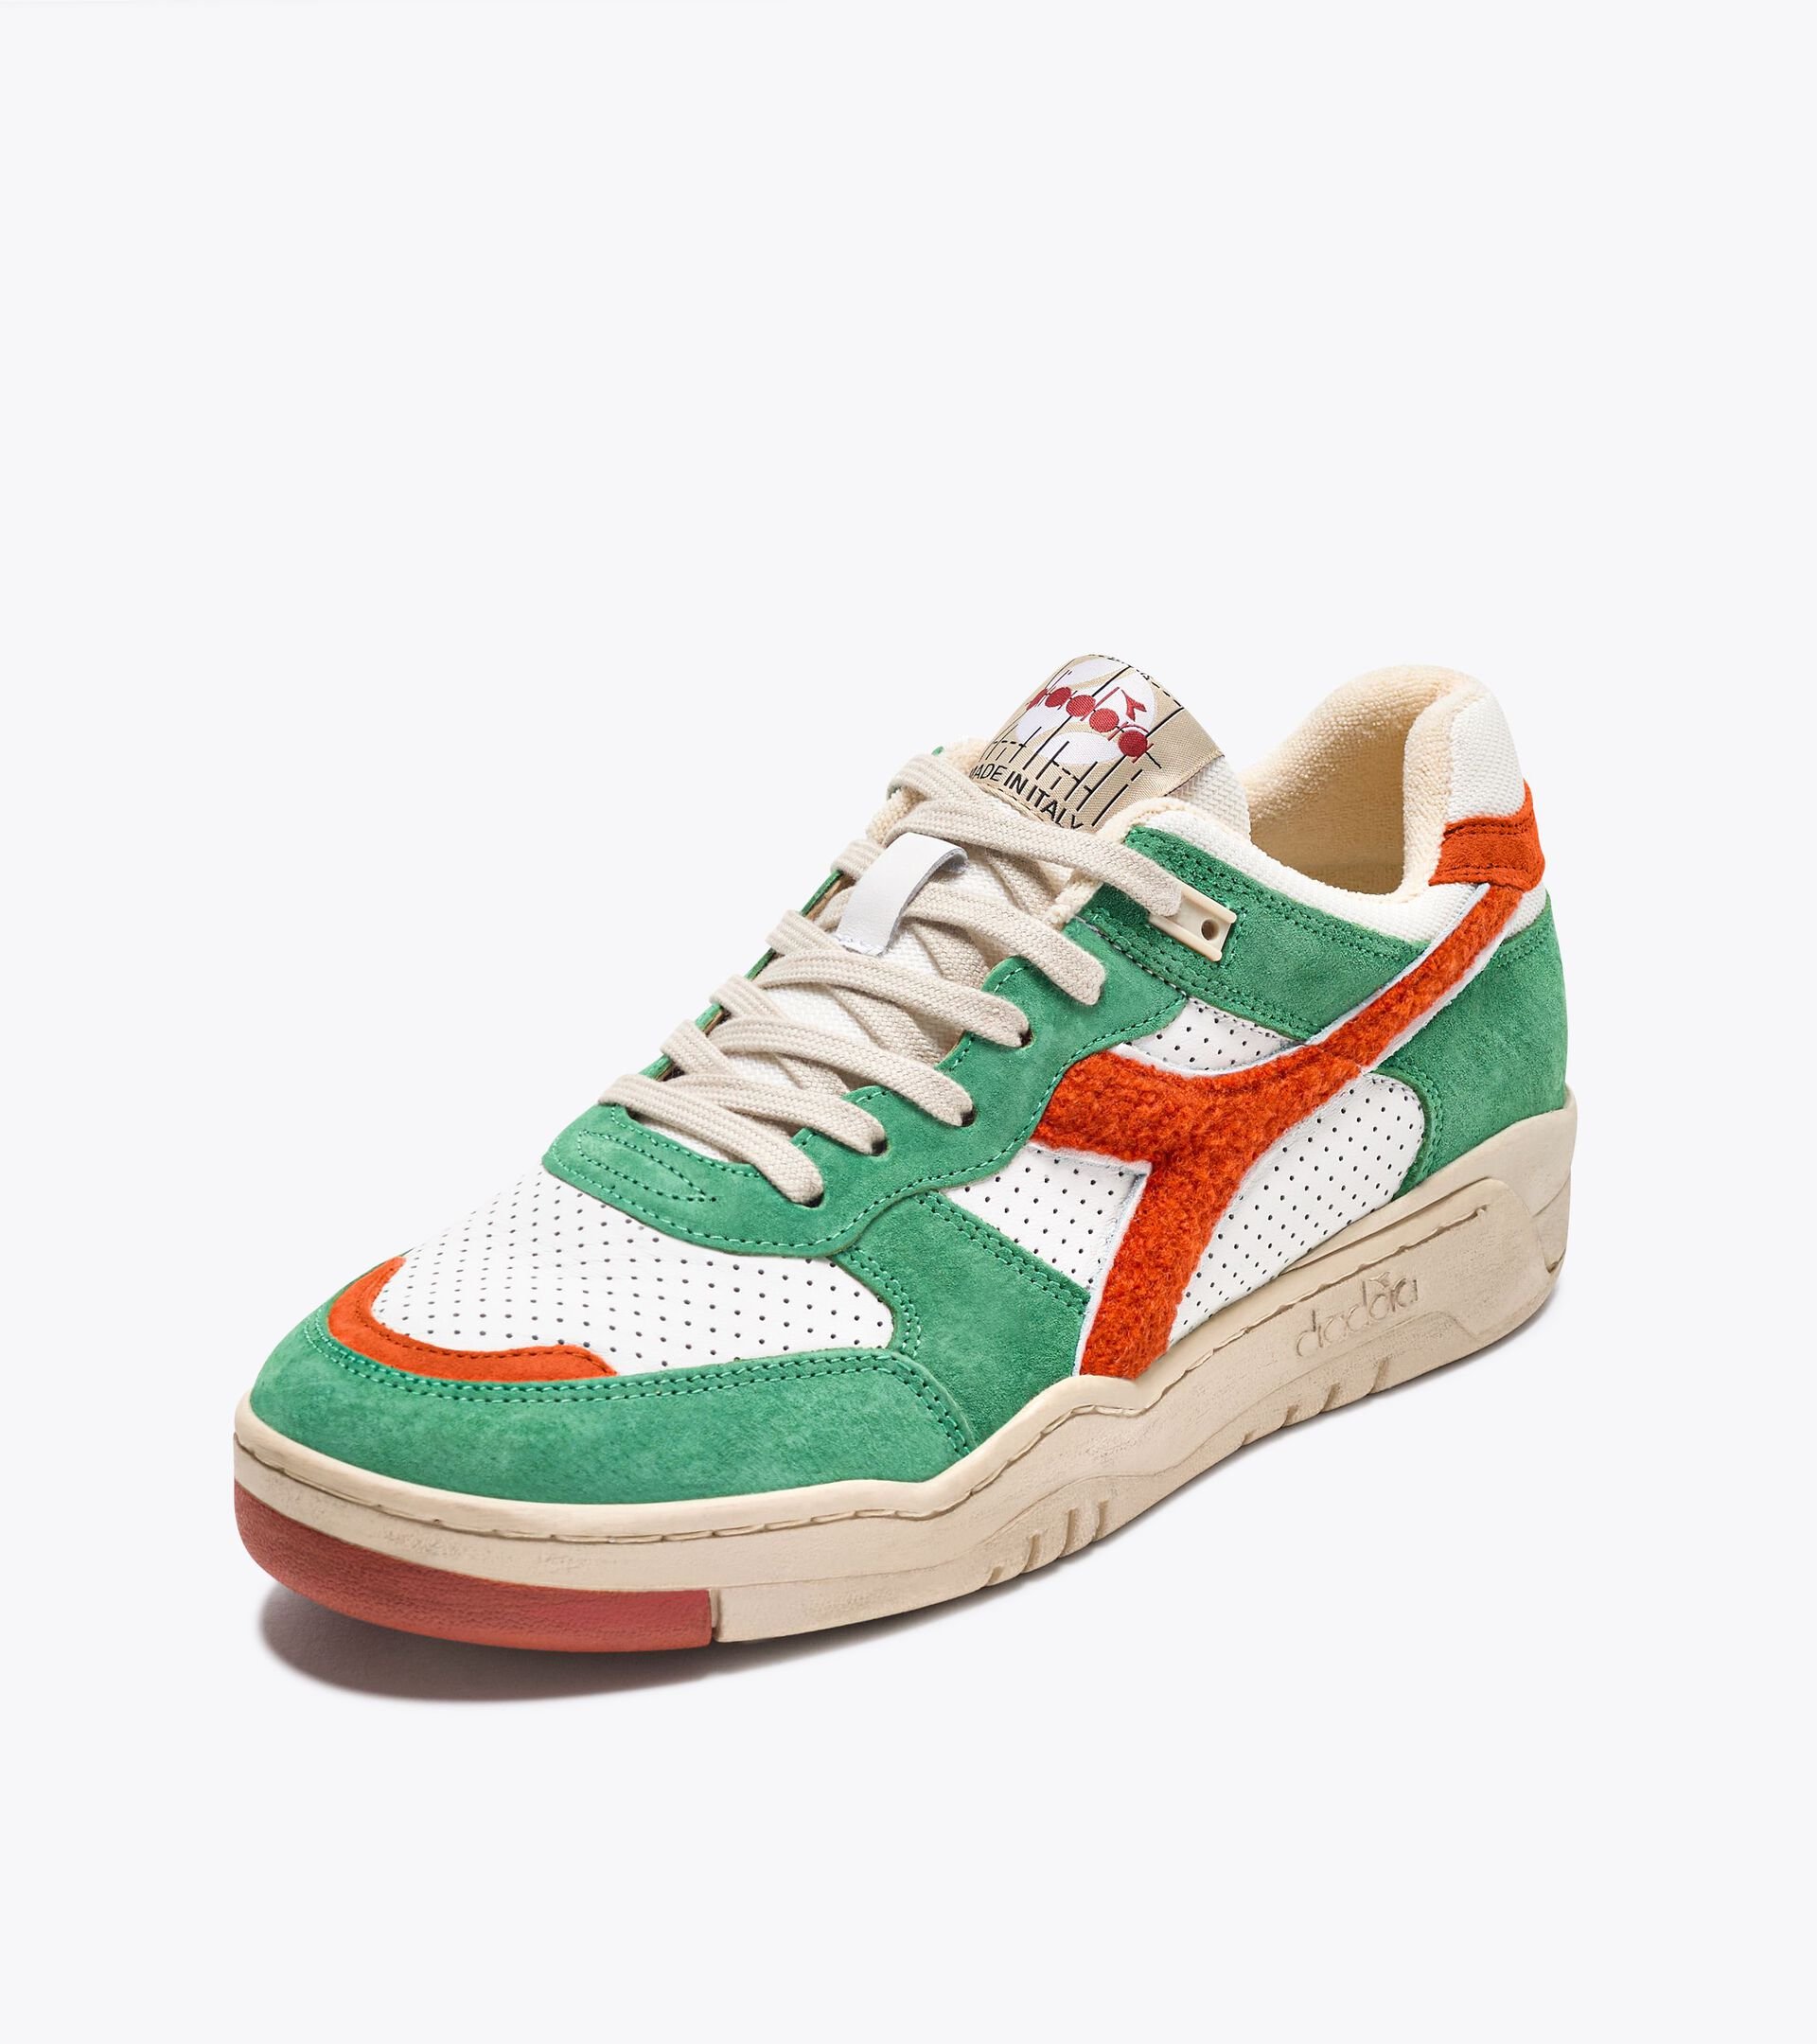 Sneakers Heritage - Made in Italy - Gender neutral B.560 USED RR ITALIA MARRON ROUILLE - Diadora